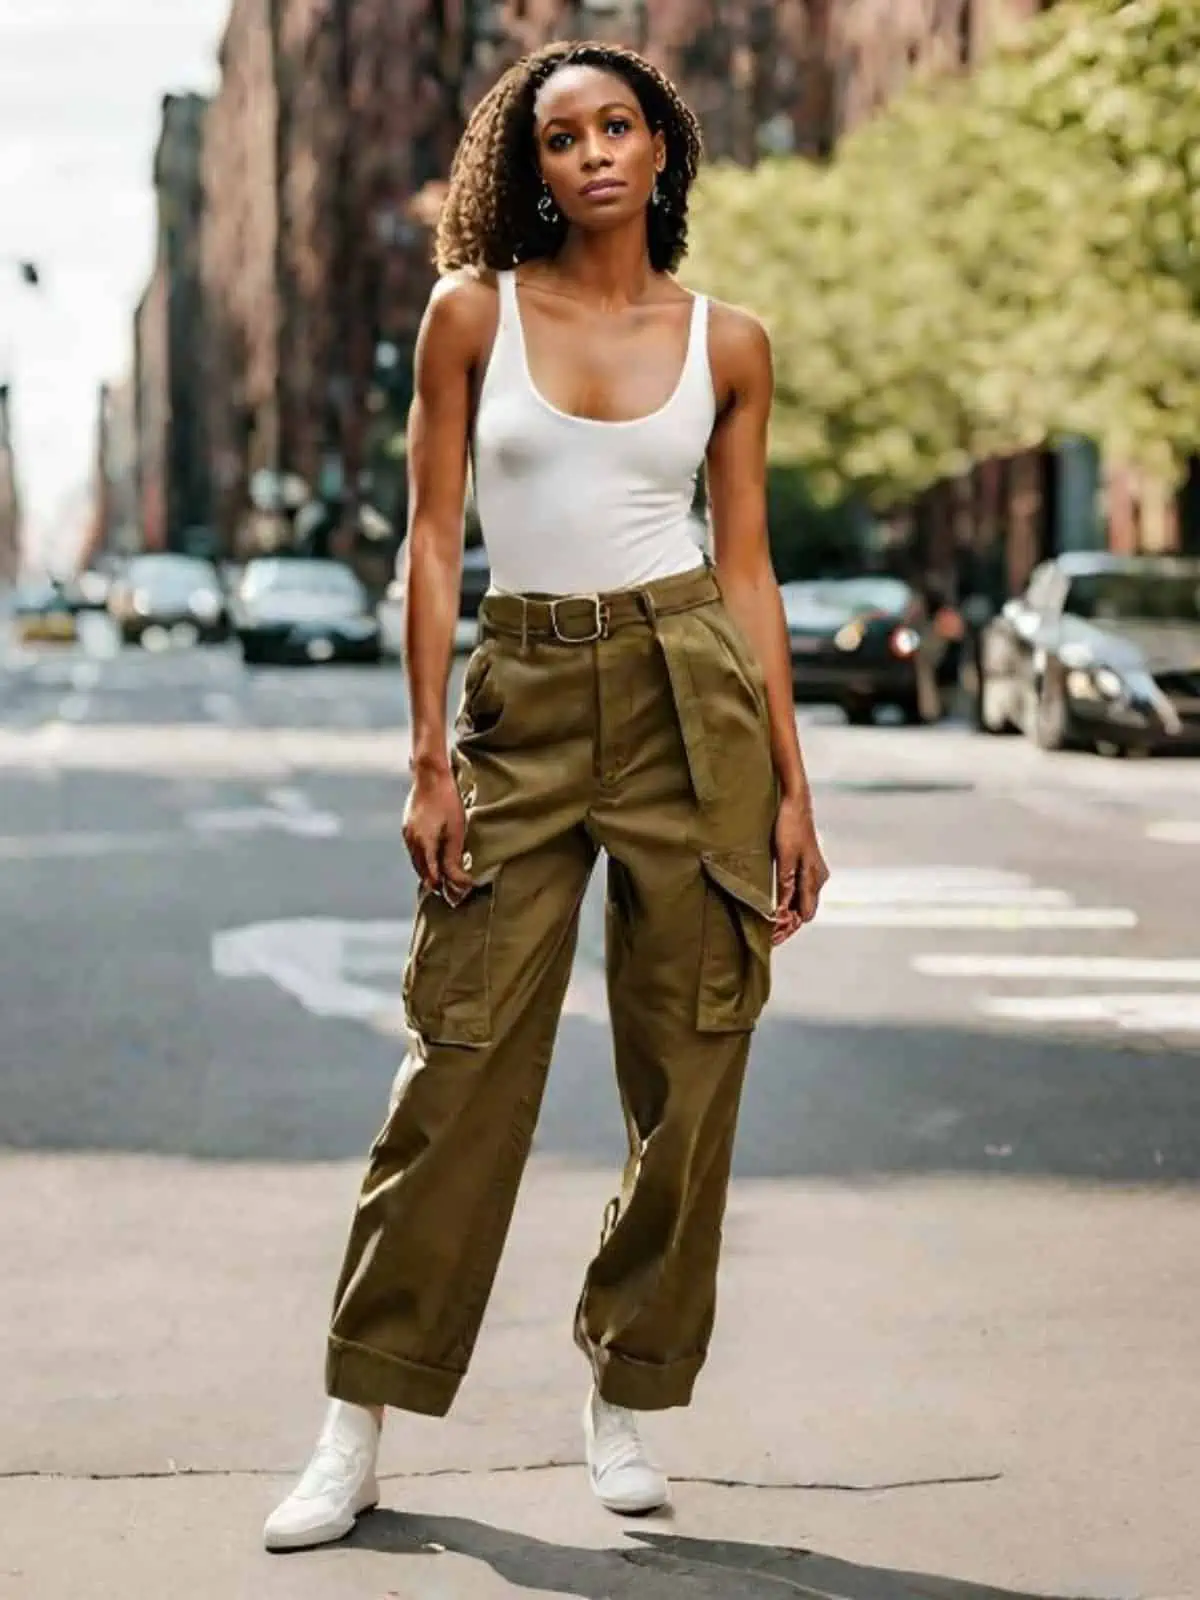 Brown Cargo Pants with White and Red Shoes Outfits (40 ideas